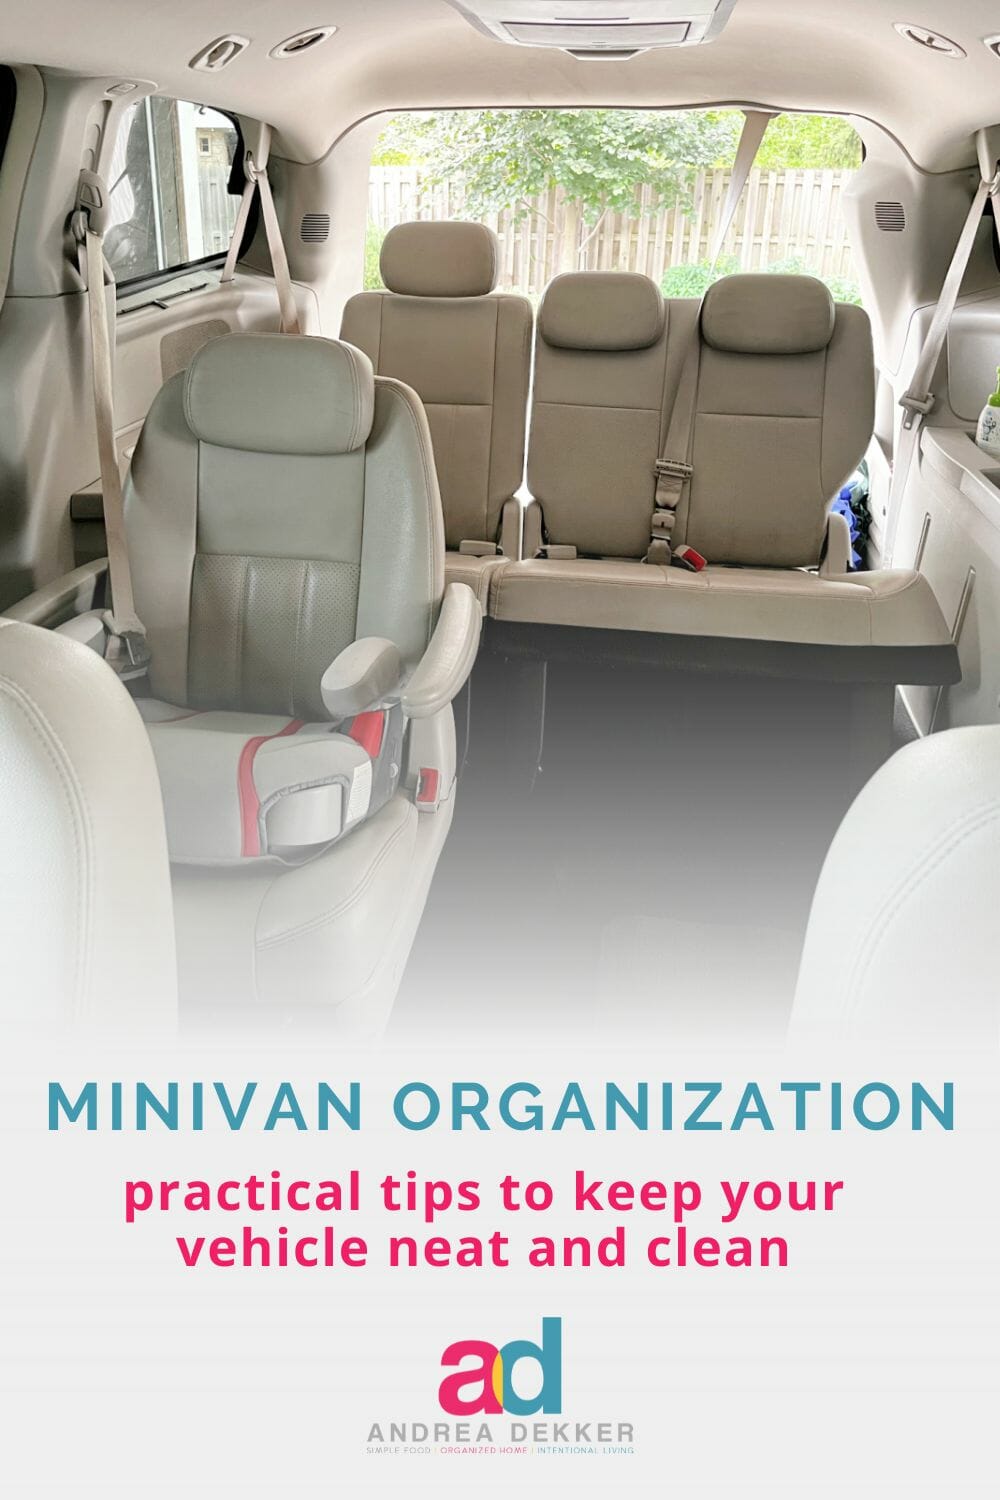 I've got a few practical tips to help you maintain a neat, clean, and organized vehicle (even with a bunch of kids) and keep it that way! via @andreadekker